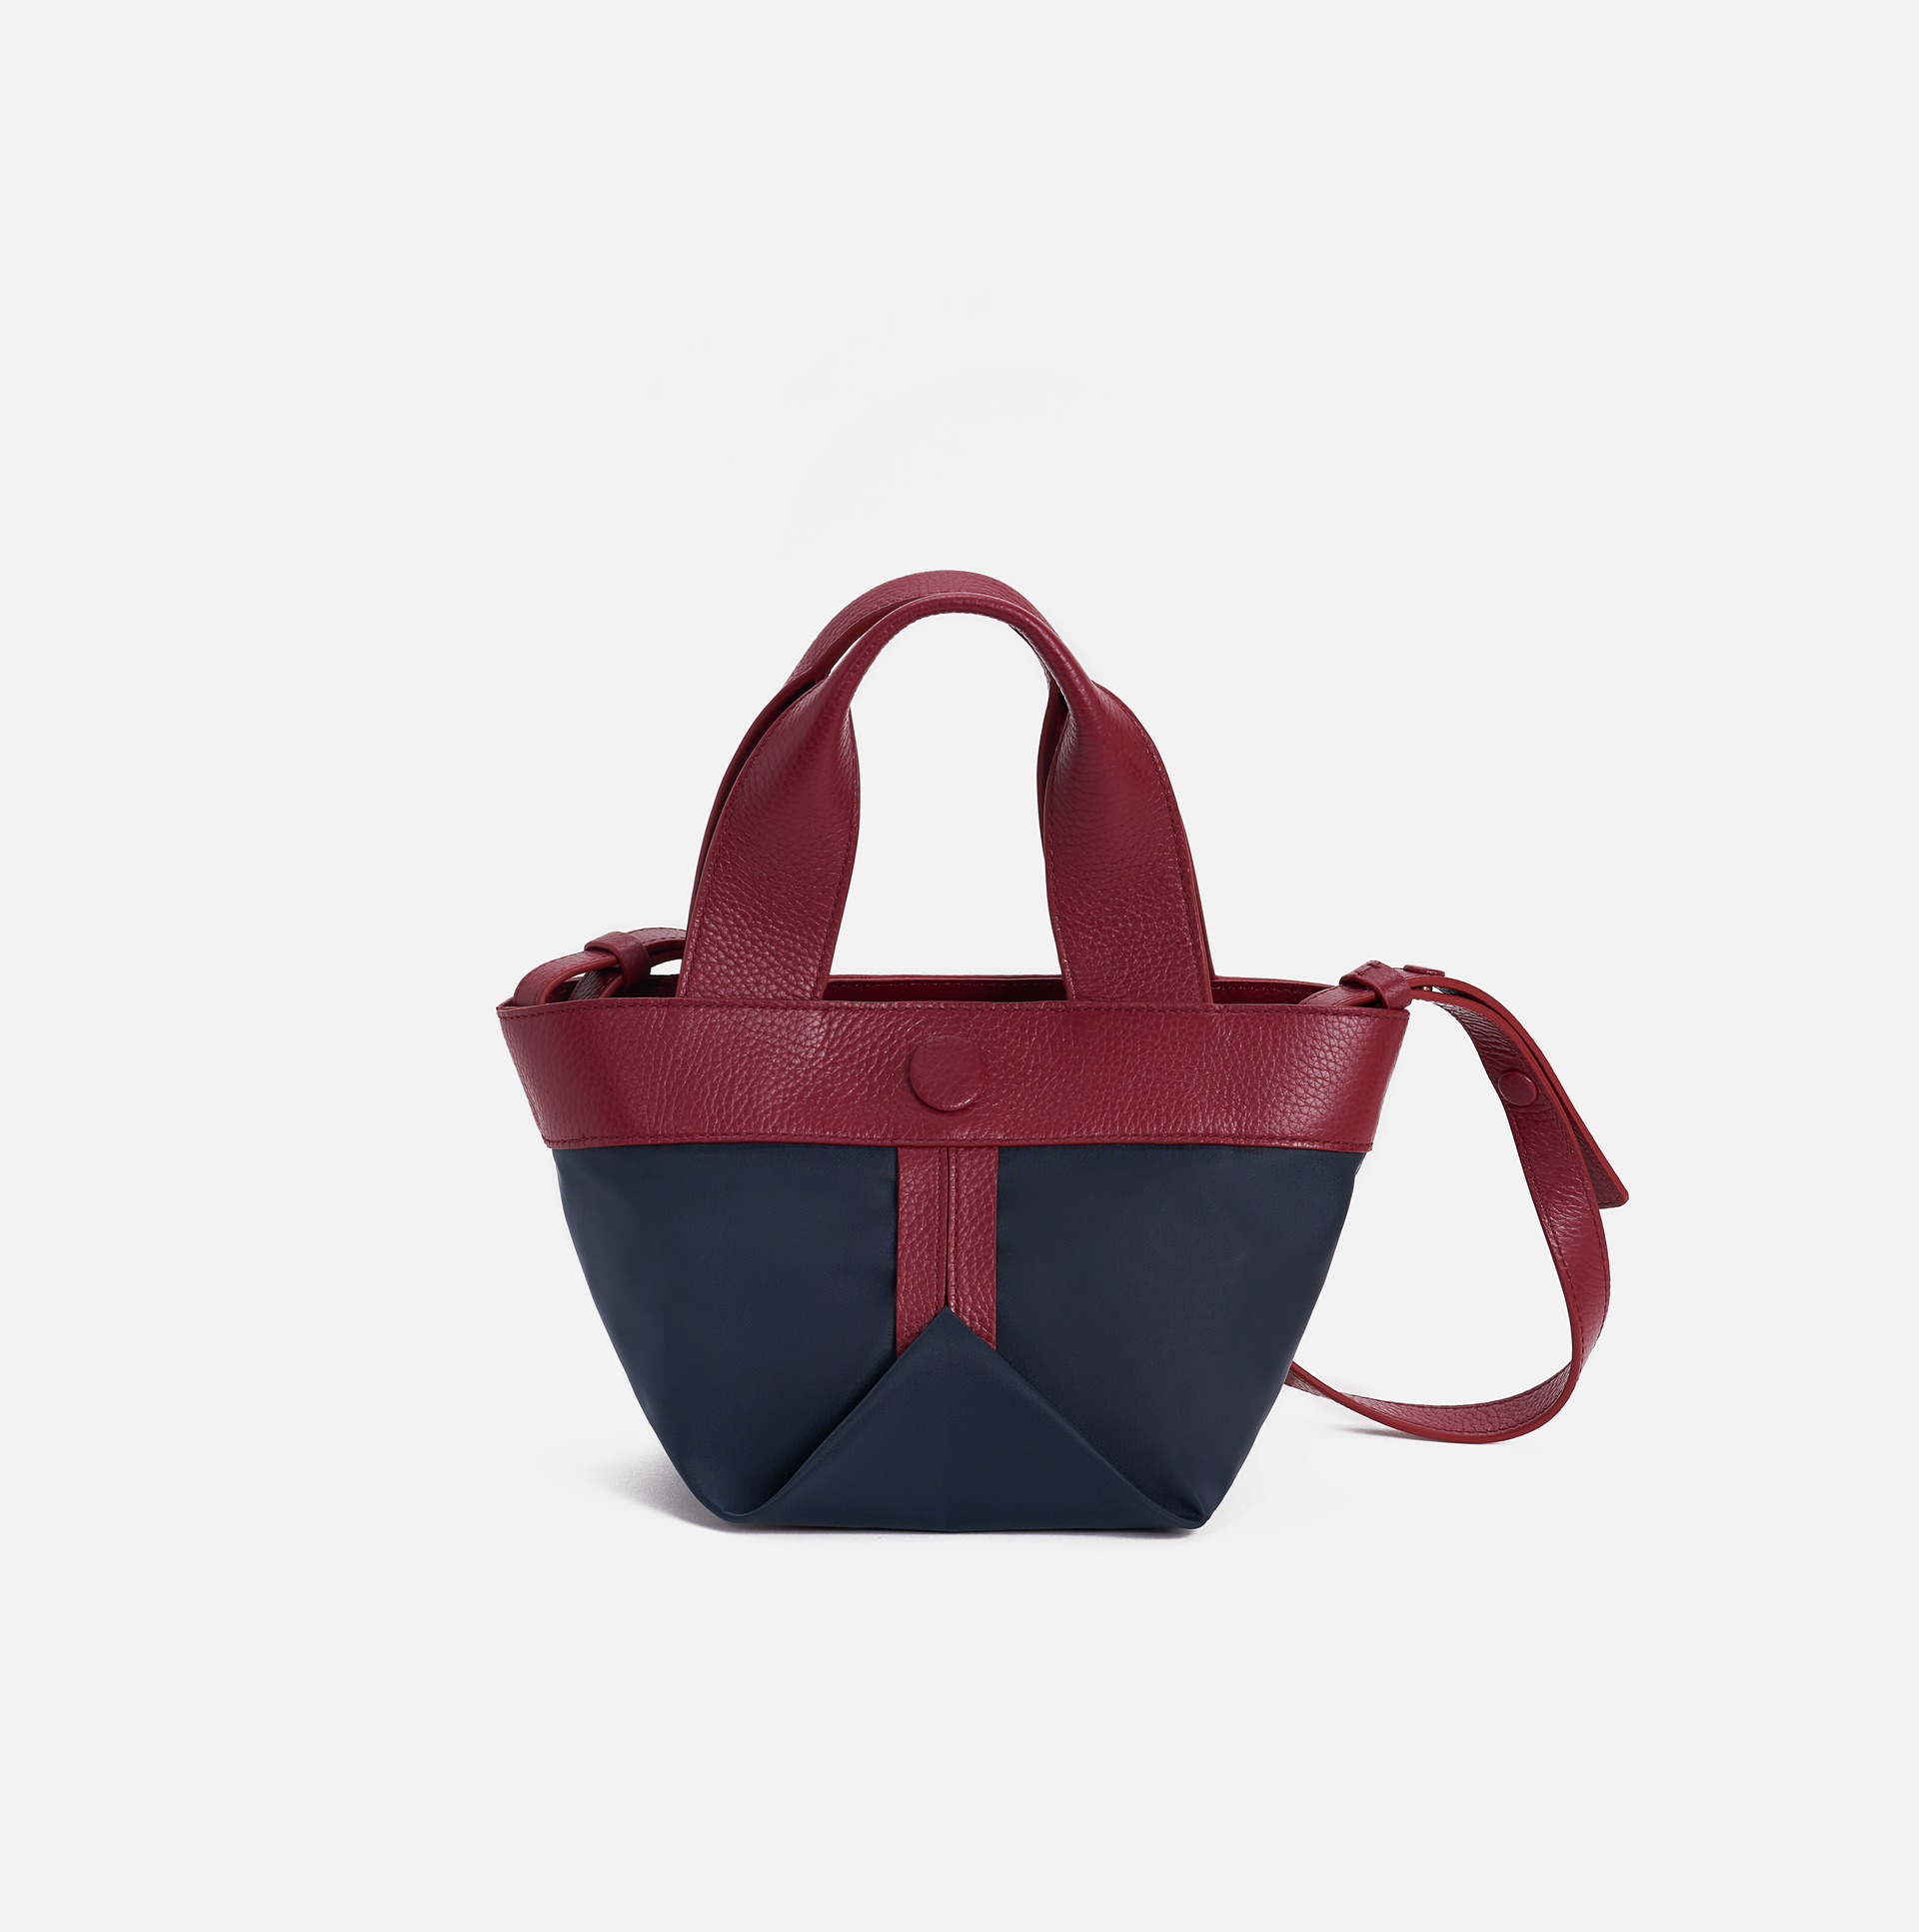 Gusset small nylon tote with pebble leather trim in navy / burgundy